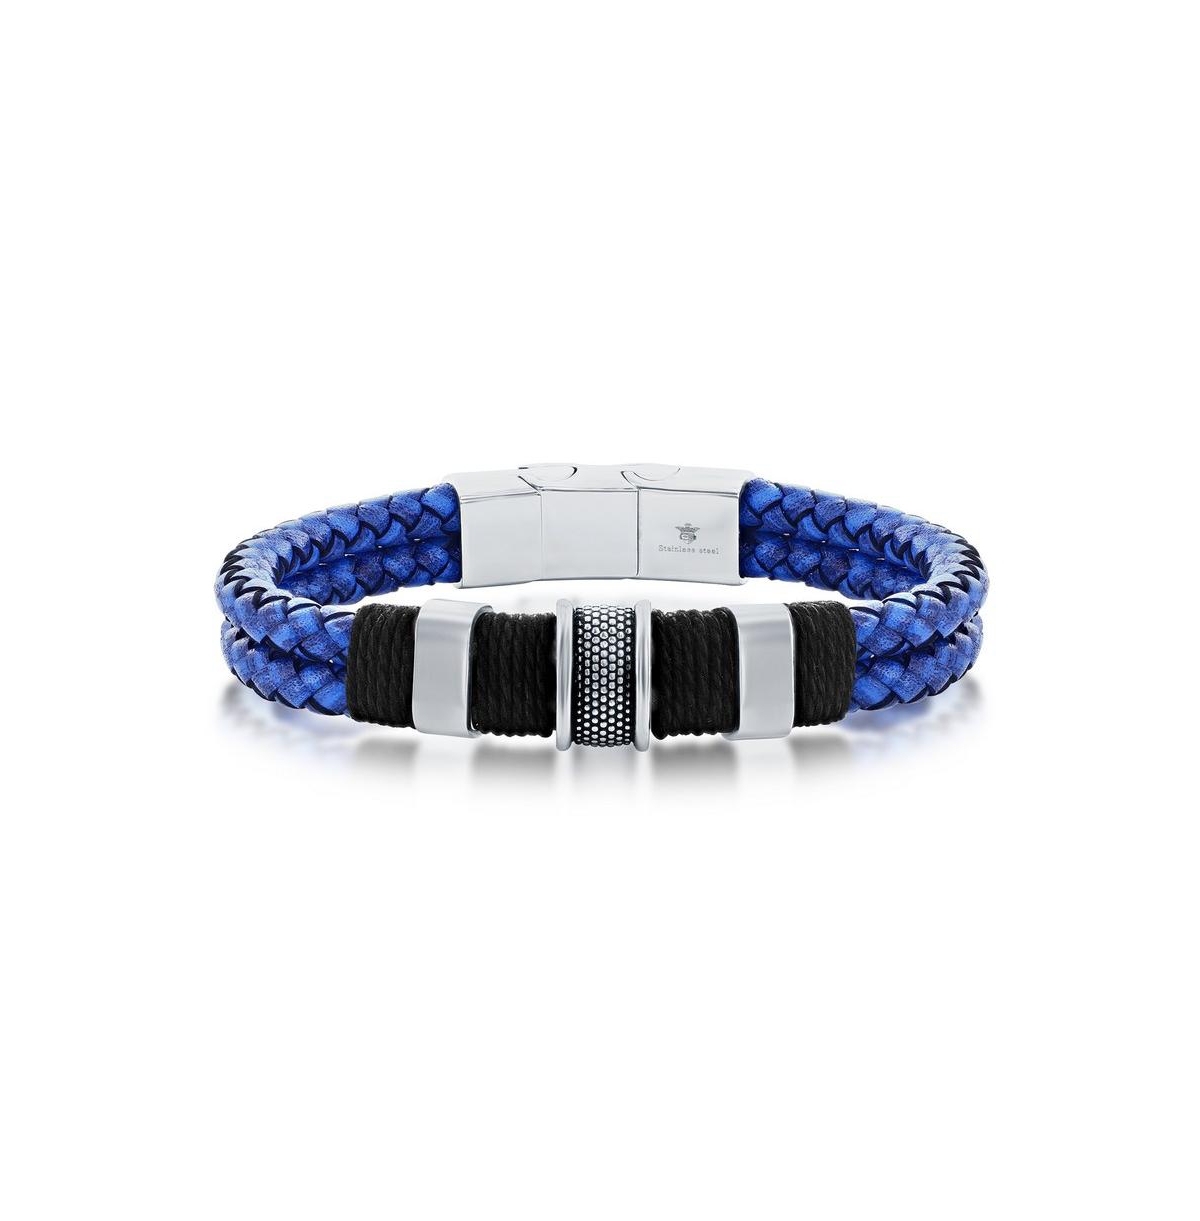 Stainless Steel Double Strand Genuine Leather Bracelet - Blue